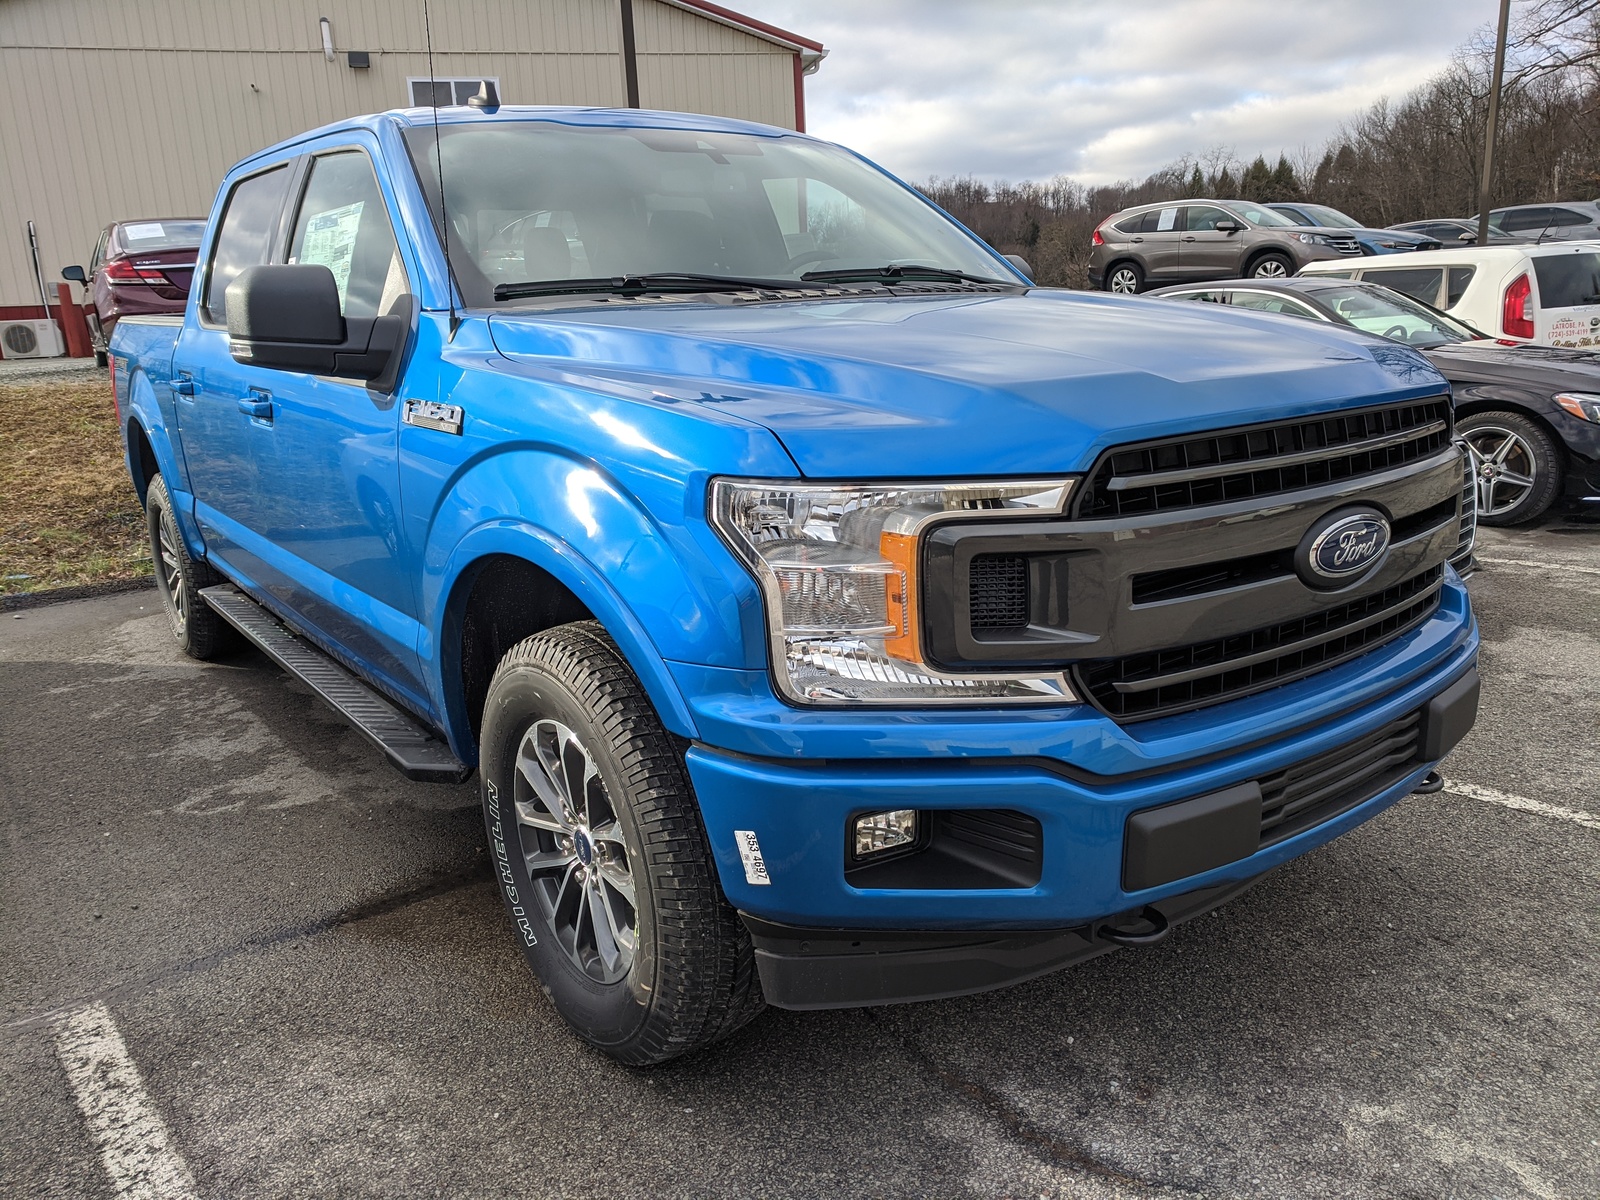 New 2020 Ford F-150 XLT in Velocity Blue Metallic | Greensburg, PA | # ...